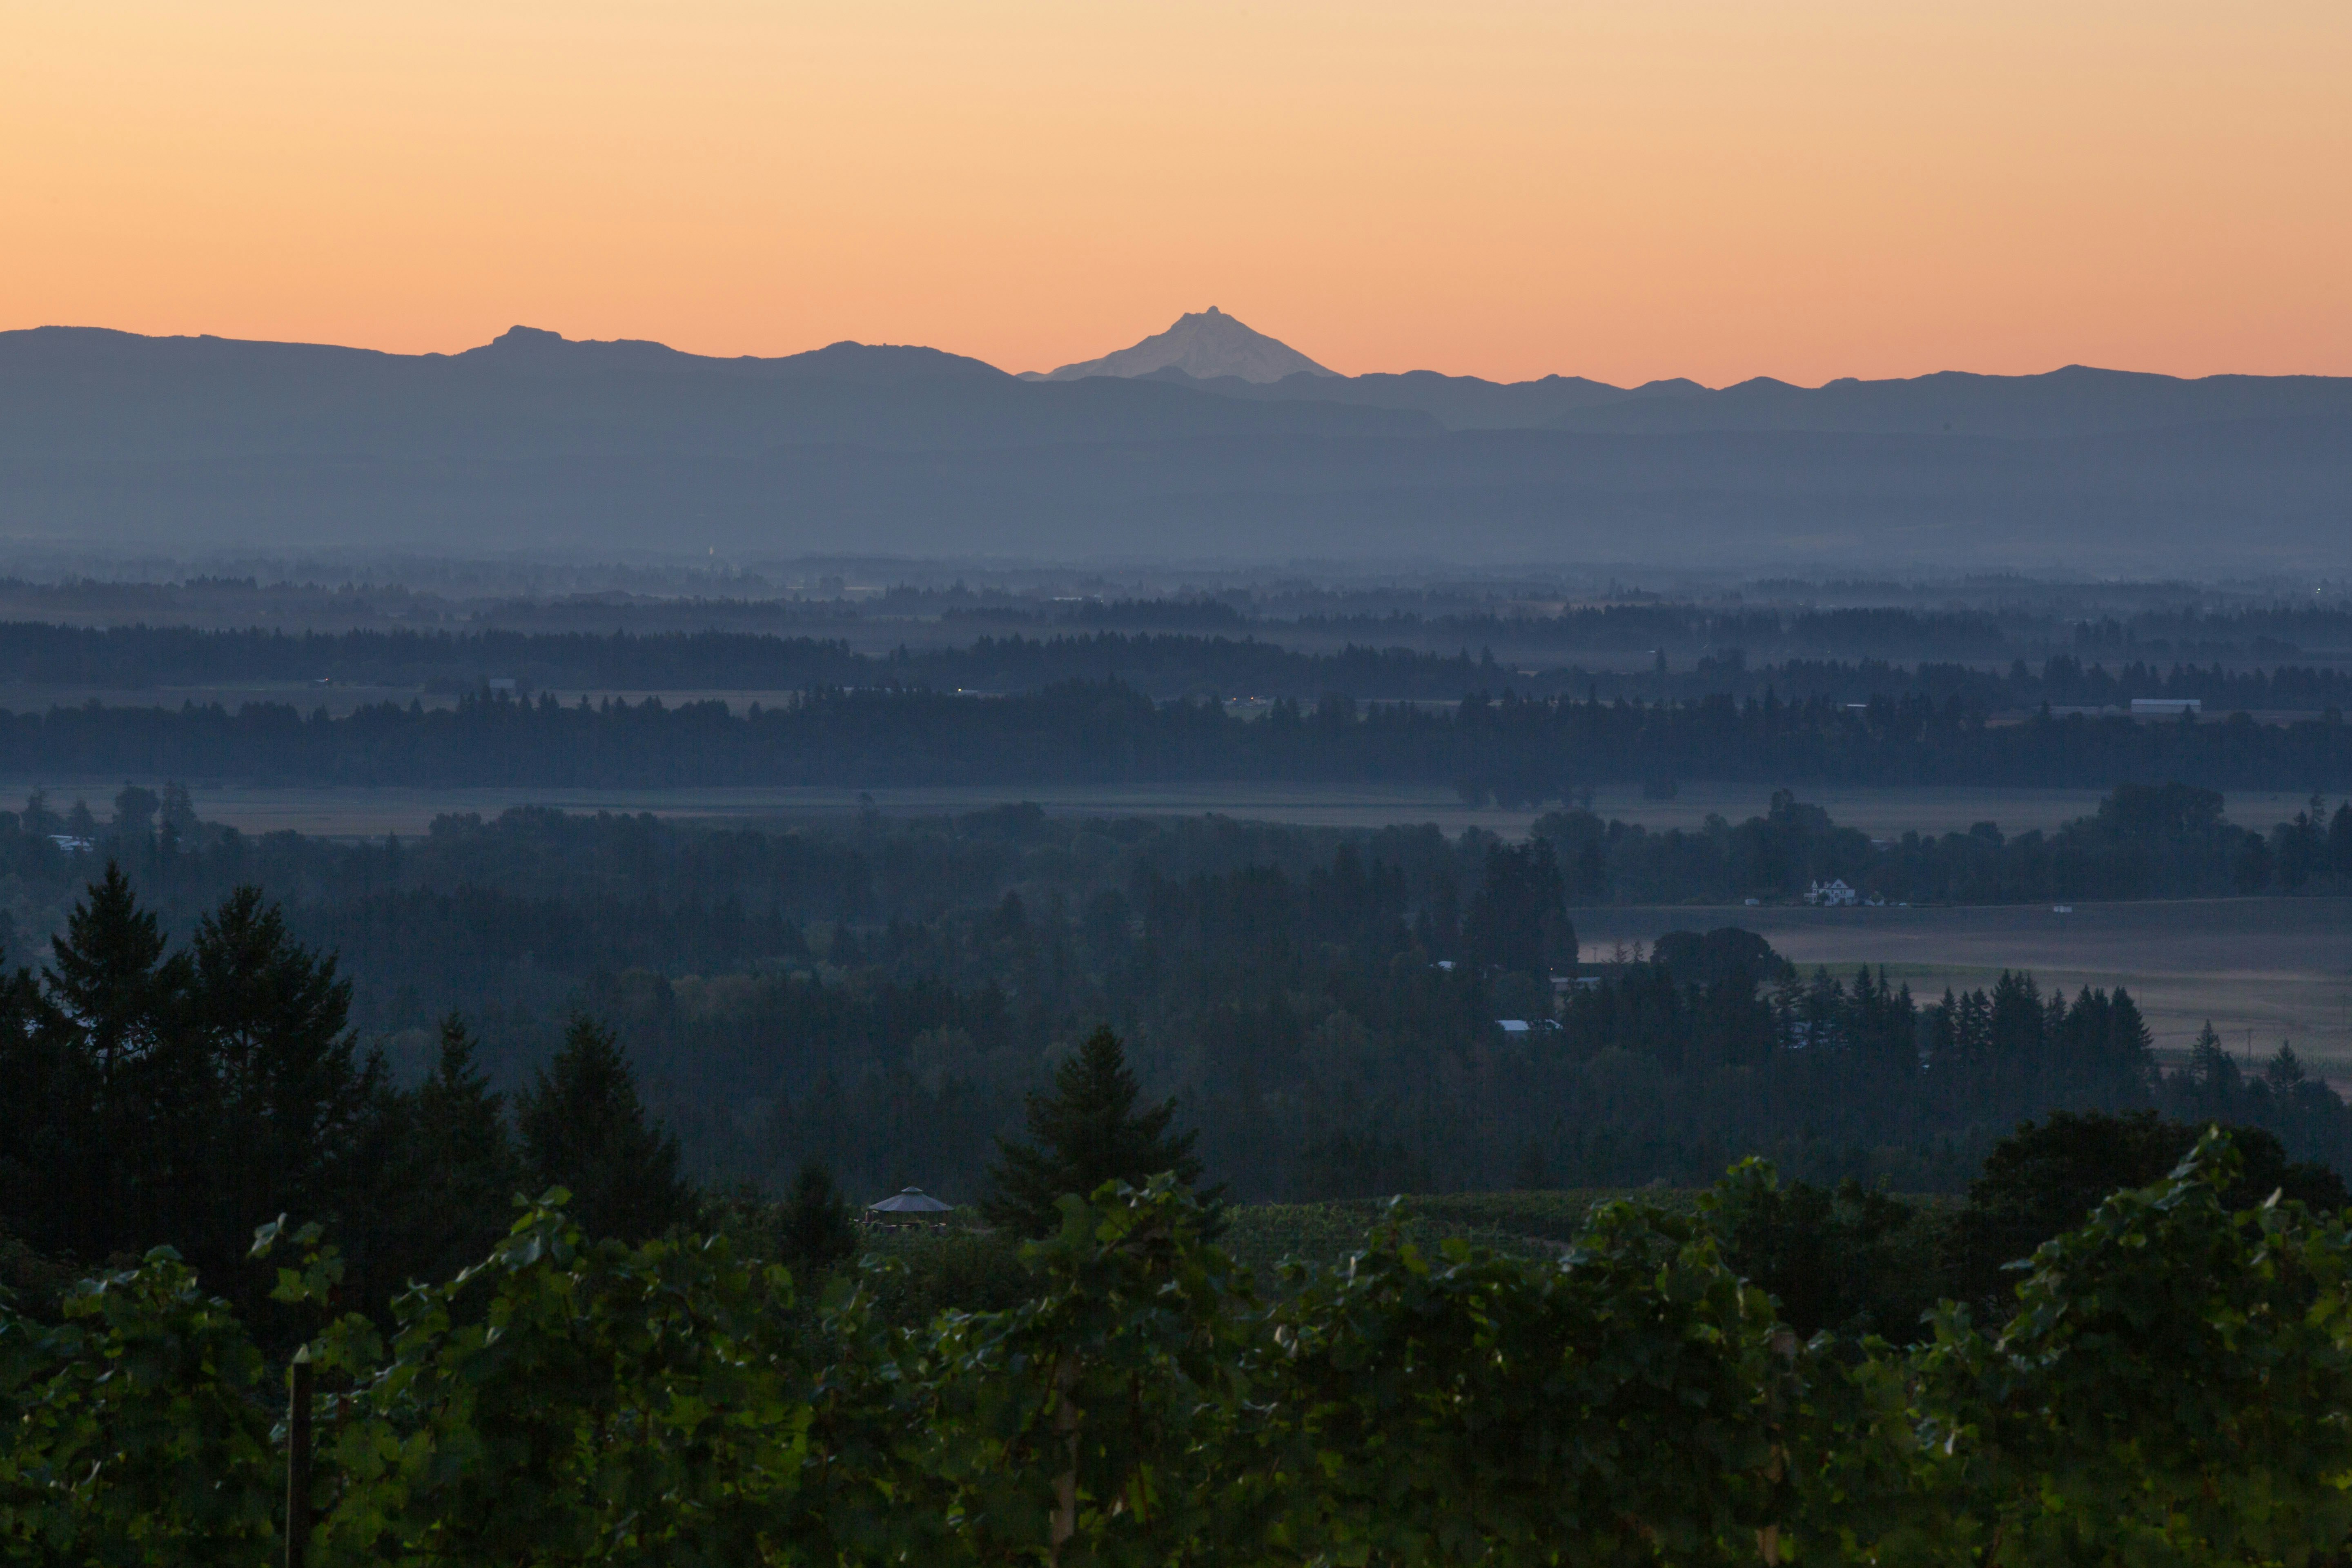 A view of the Cascade Range from the top of a hill near Oregon's Willamette Valley Wine Country, the blue mountains contrasting with the sherbet orange sky